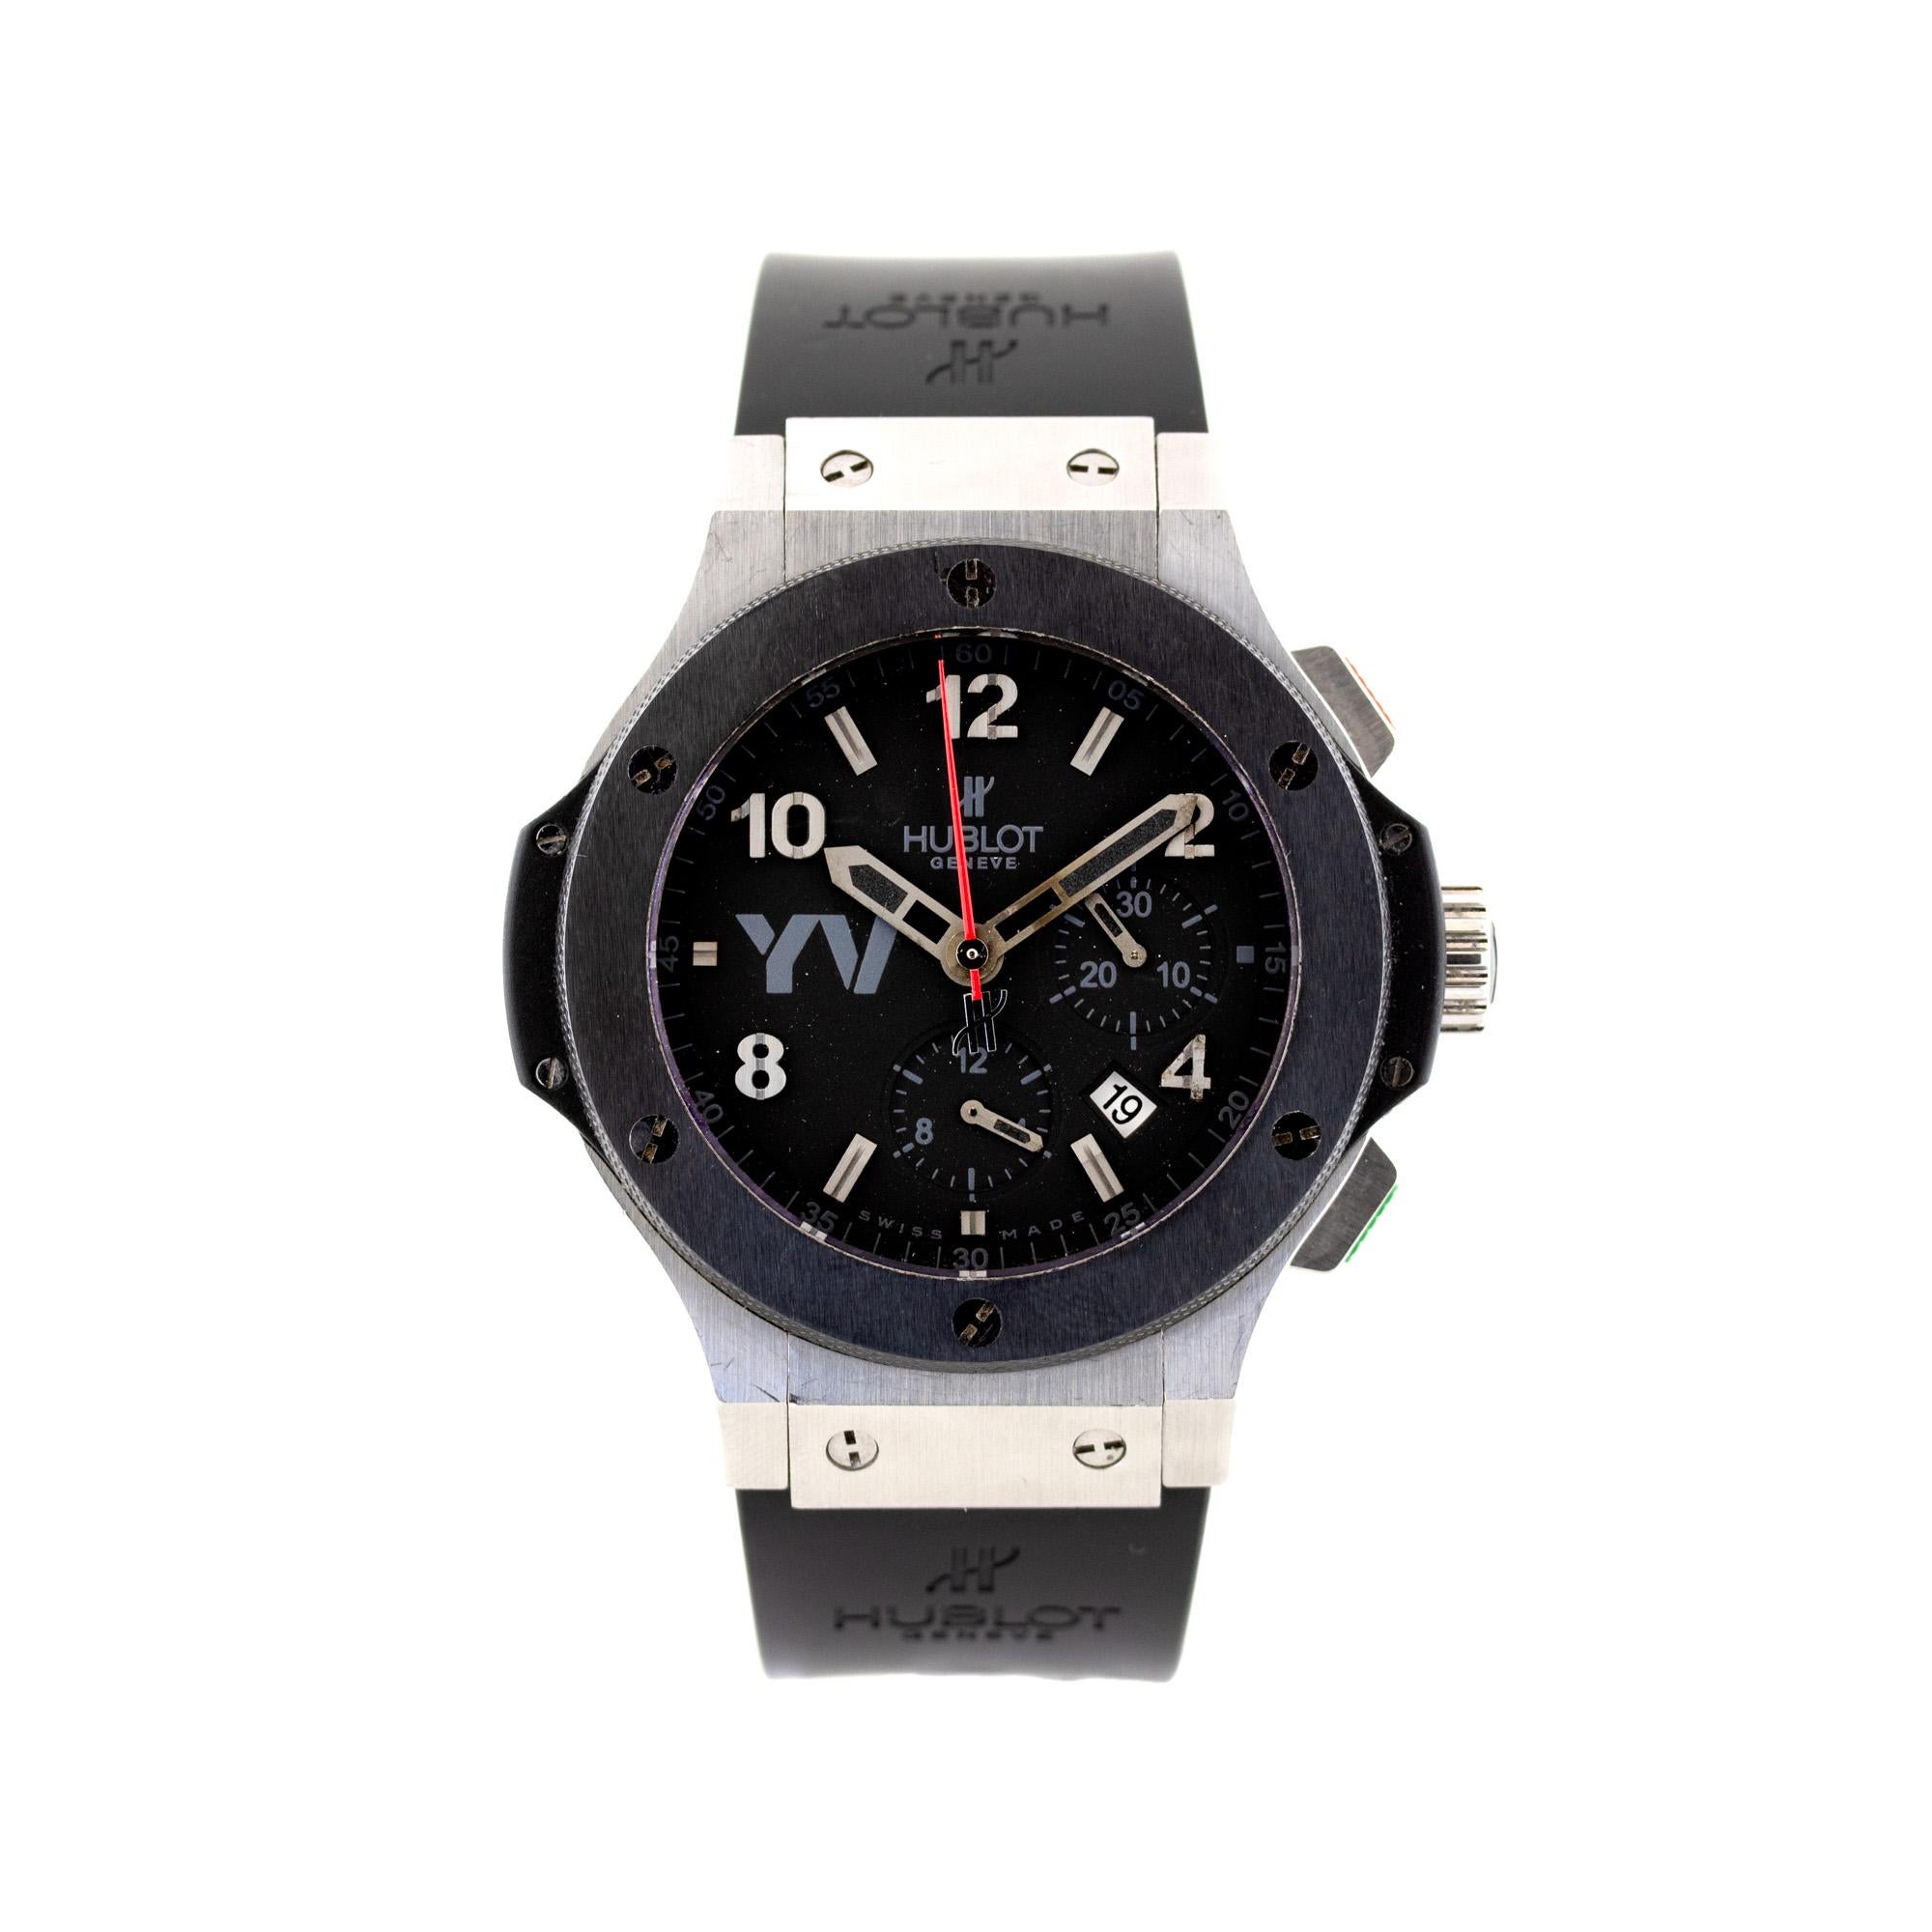 Brand: Hublot
MPN: 301.yankee.victor
Case Material: Stainless Steel
Case Diameter: 44mm
Crystal: Sapphire crystal (scratch resistant)
Bezel: Ceramic
Dial: Black
Bracelet: White Rubber bracelet
Size: Will fit a 7″ wrist
Clasp: Fold over